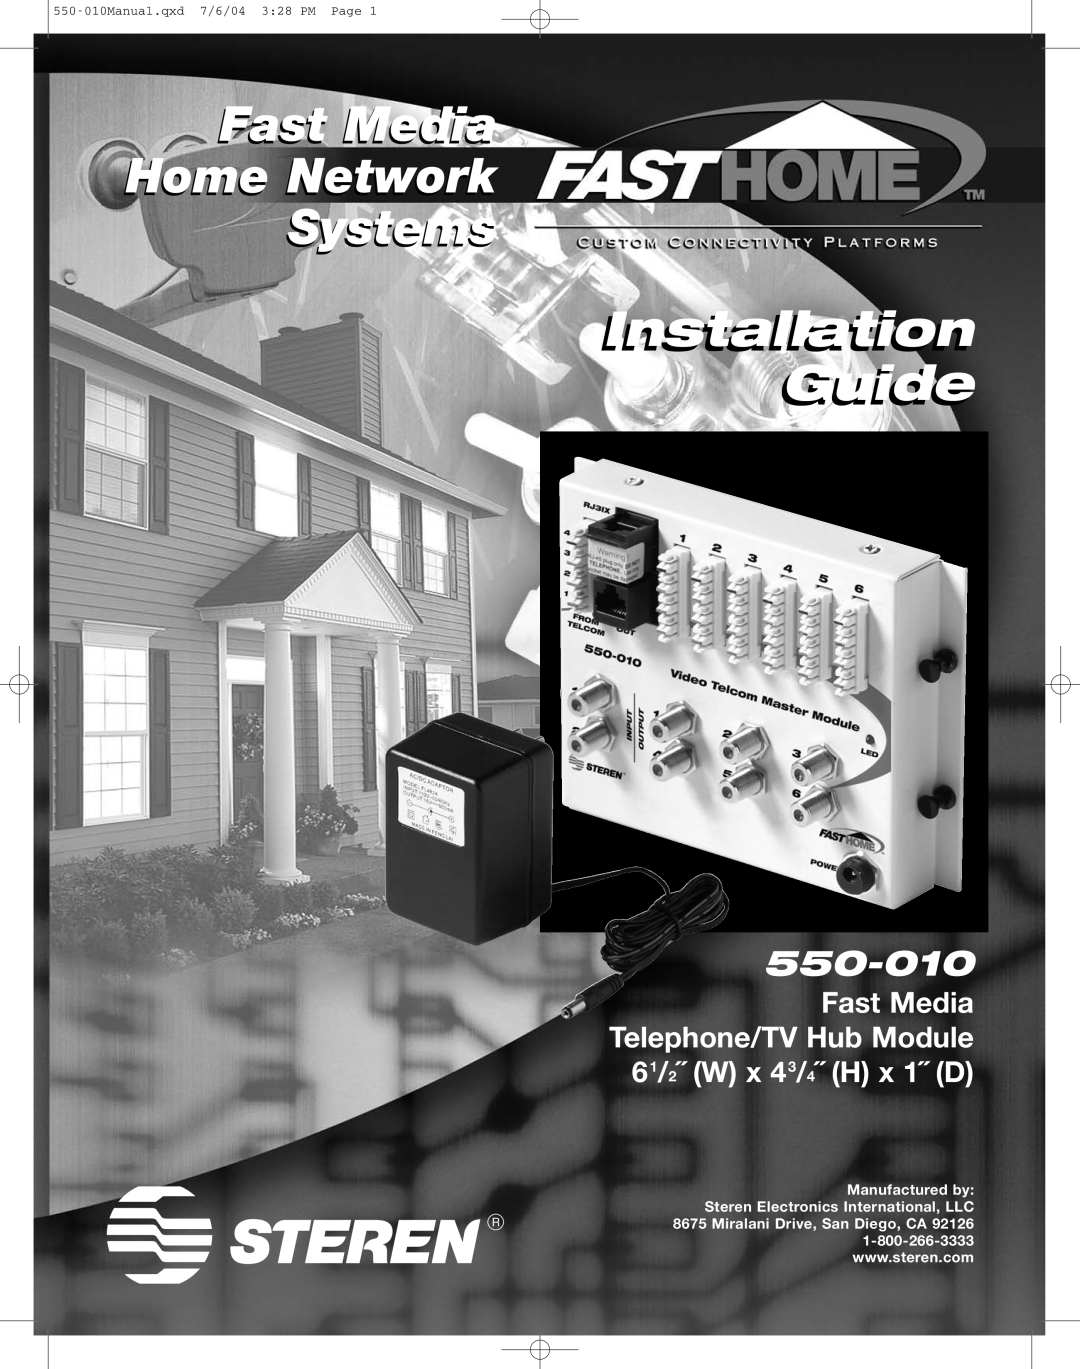 Steren manual Fast Media Home Network Systems, Installationll i Guidei, 550-010Manual.qxd 7/6/04 328 PM Page 